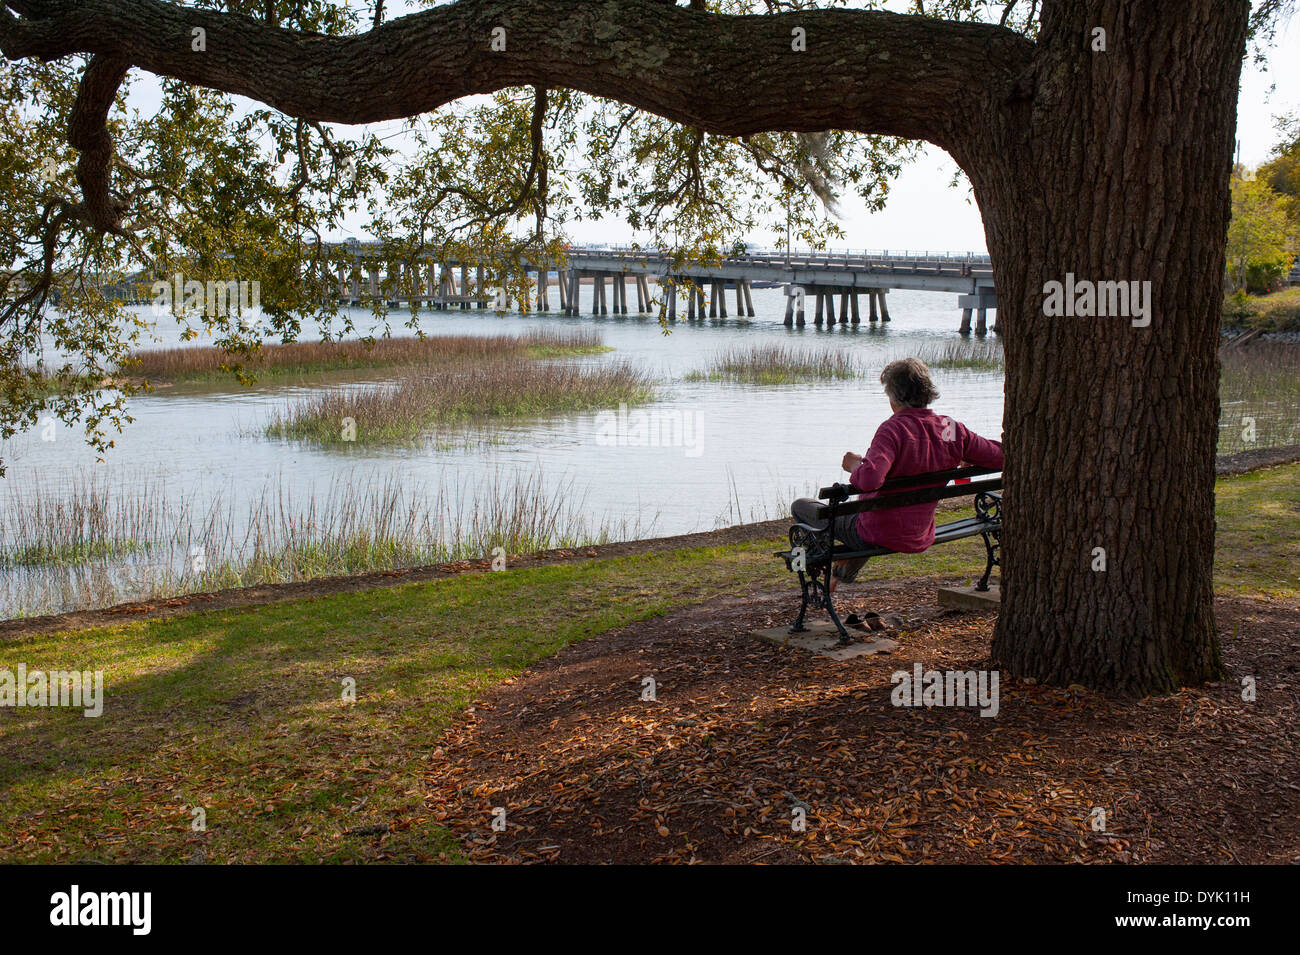 USA South Carolina SC Beaufort man sitting on a bench looking out to Beaufort River and Woods Memorial Bridge Stock Photo